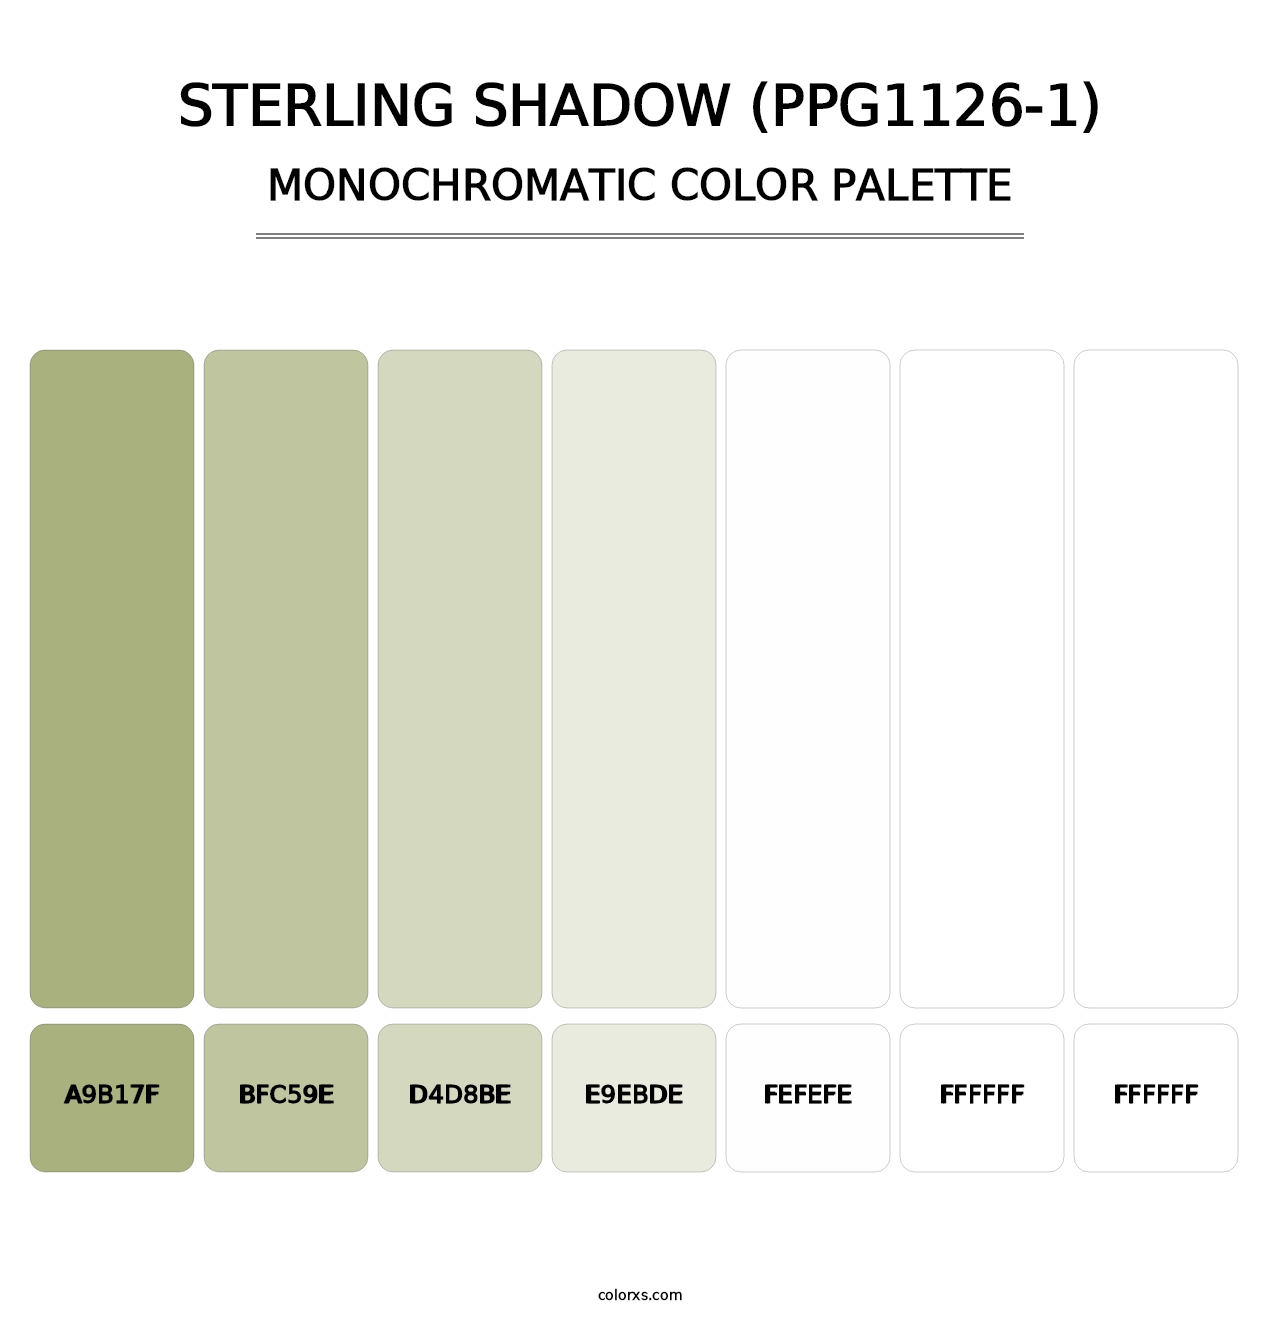 Sterling Shadow (PPG1126-1) - Monochromatic Color Palette